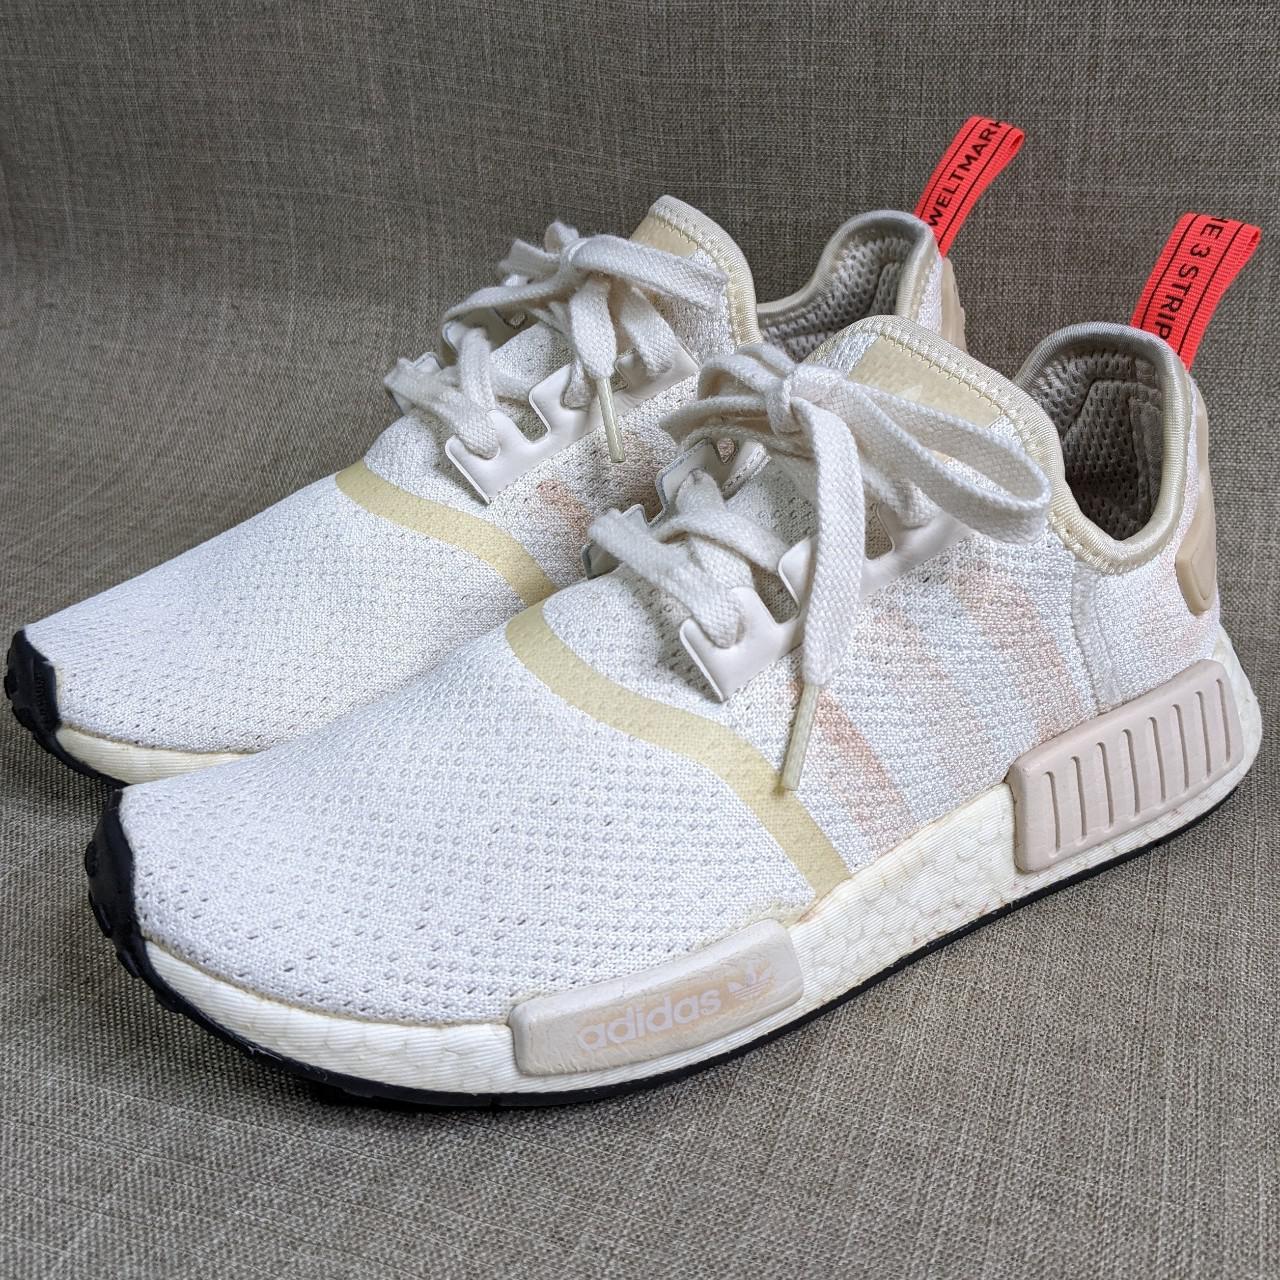 Product Image 1 - Adidas NMD R1 sneakers.

Women's size